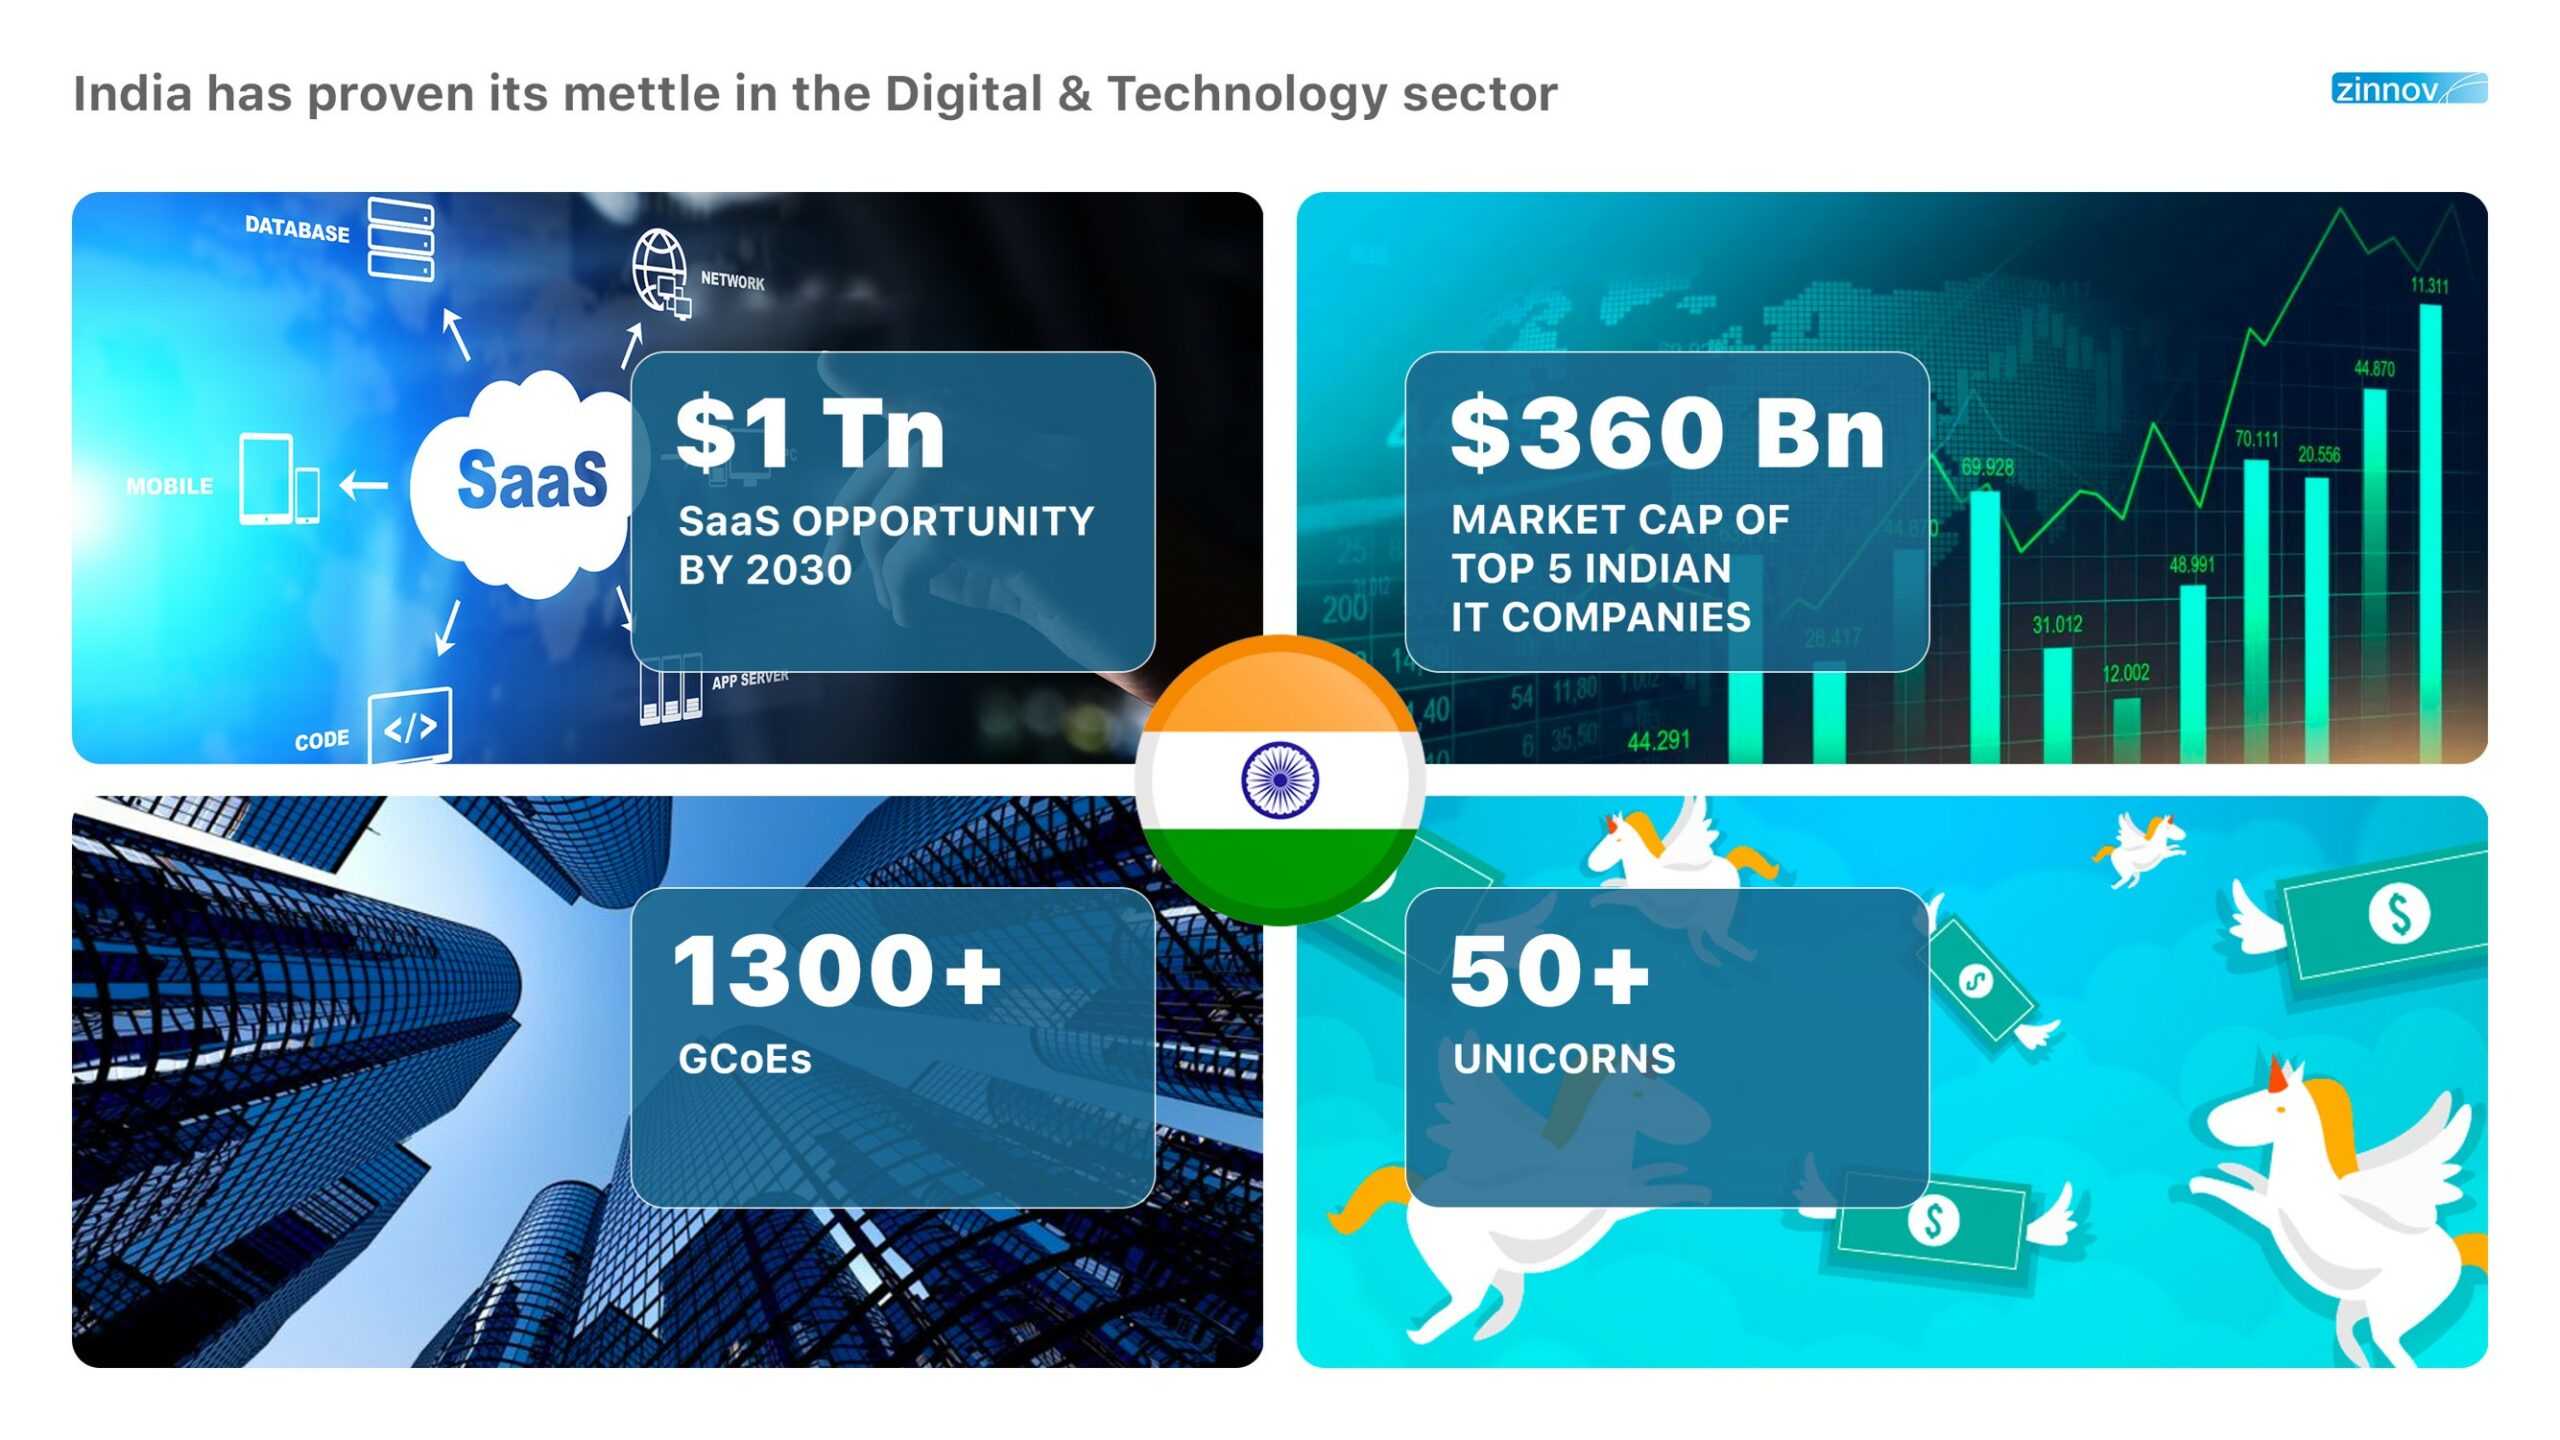 India's digital and technology sector